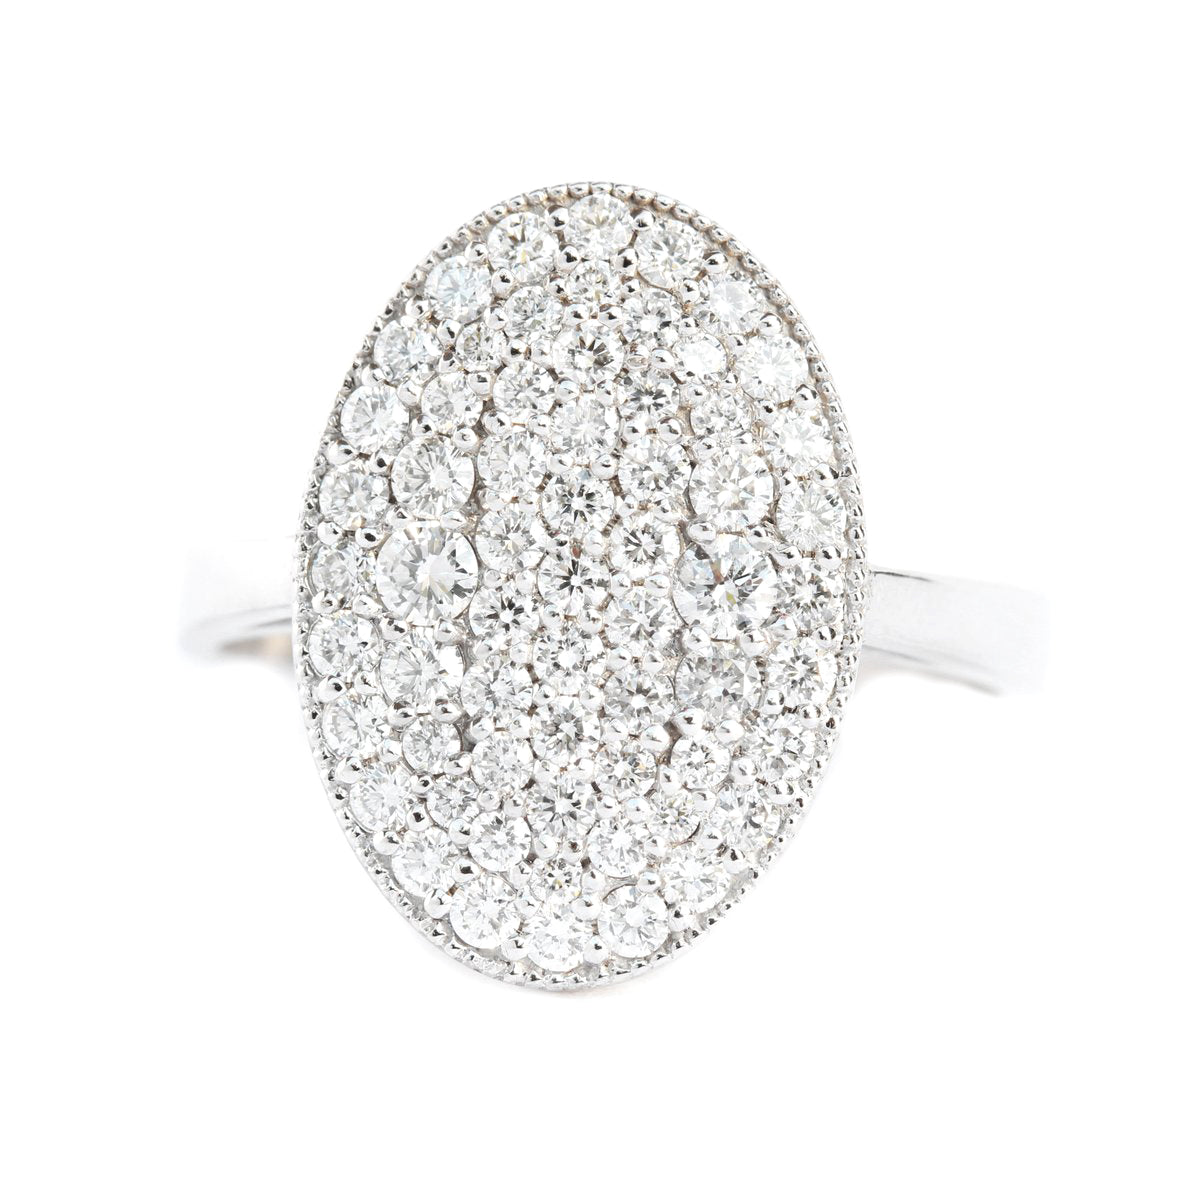 Private Payment Plan for Michelle - 14K White Gold, Size 7.5, Big Oval diamond cocktail ring